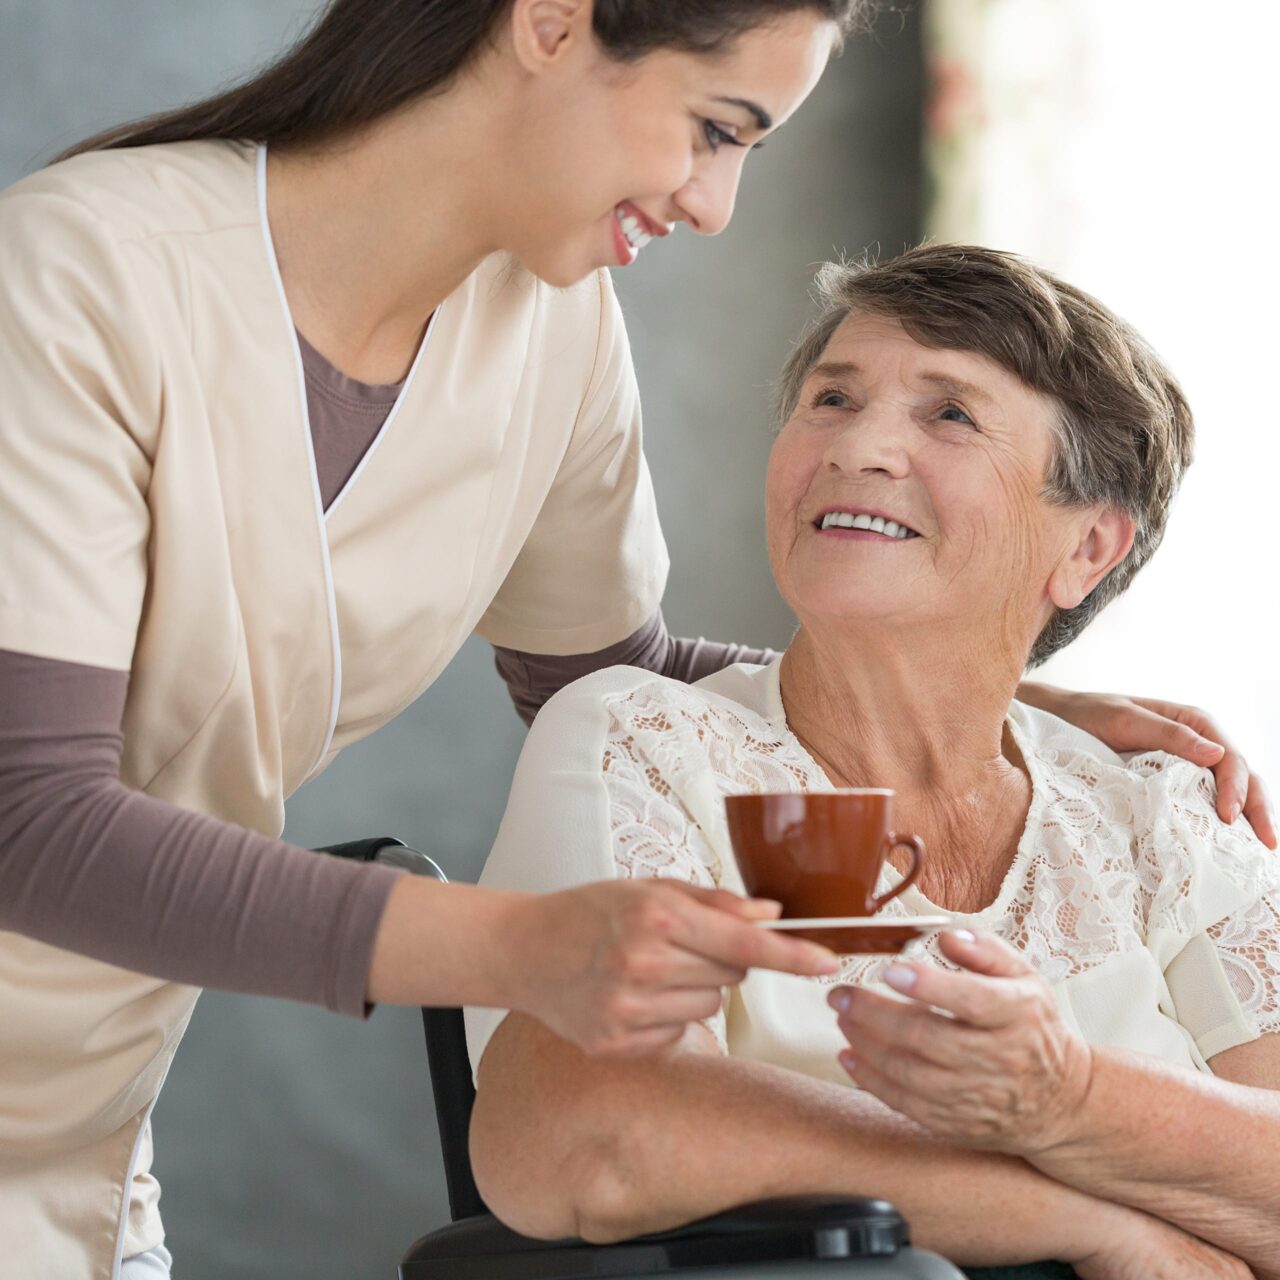 woman serving tea to another woman